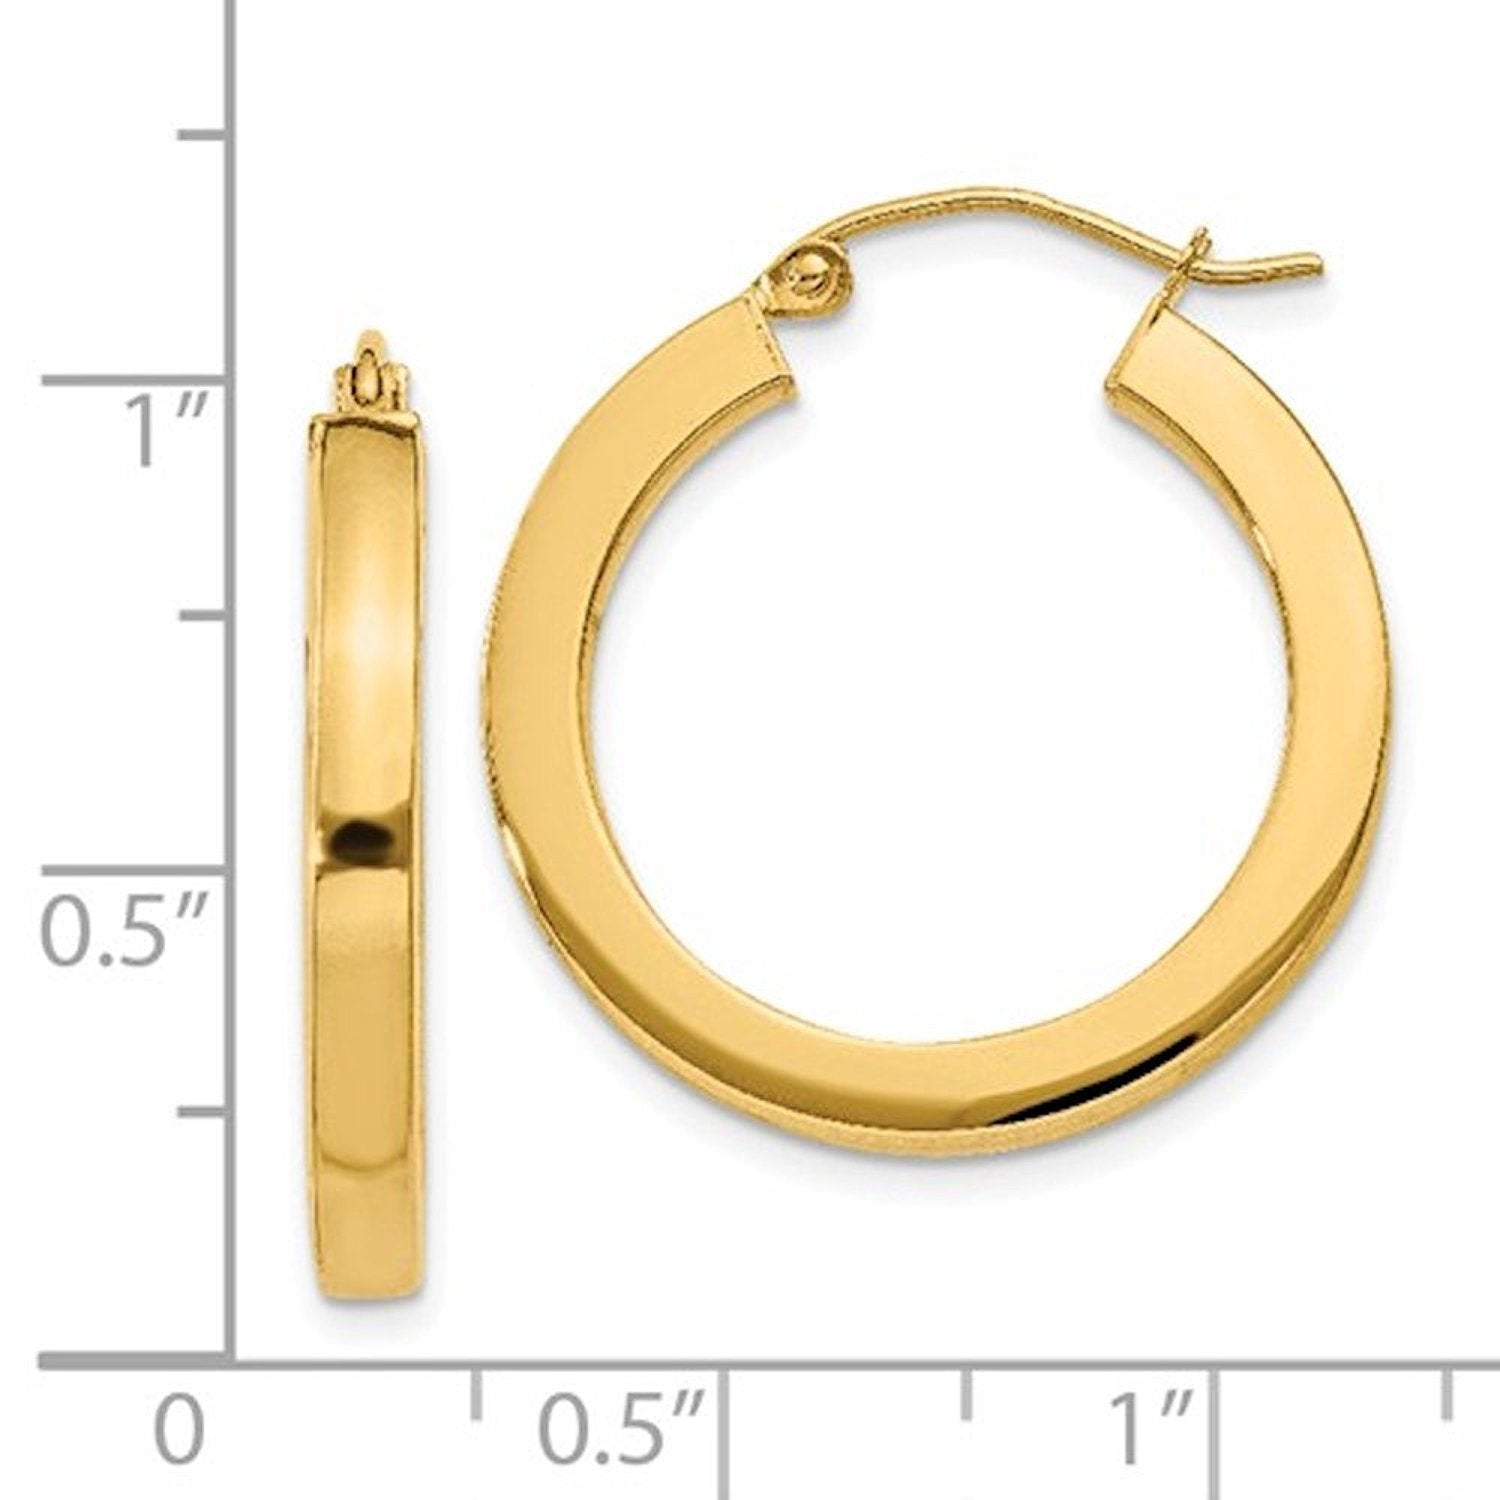 14K Yellow Gold Square Tube Round Hoop Earrings 23mm x 3mm